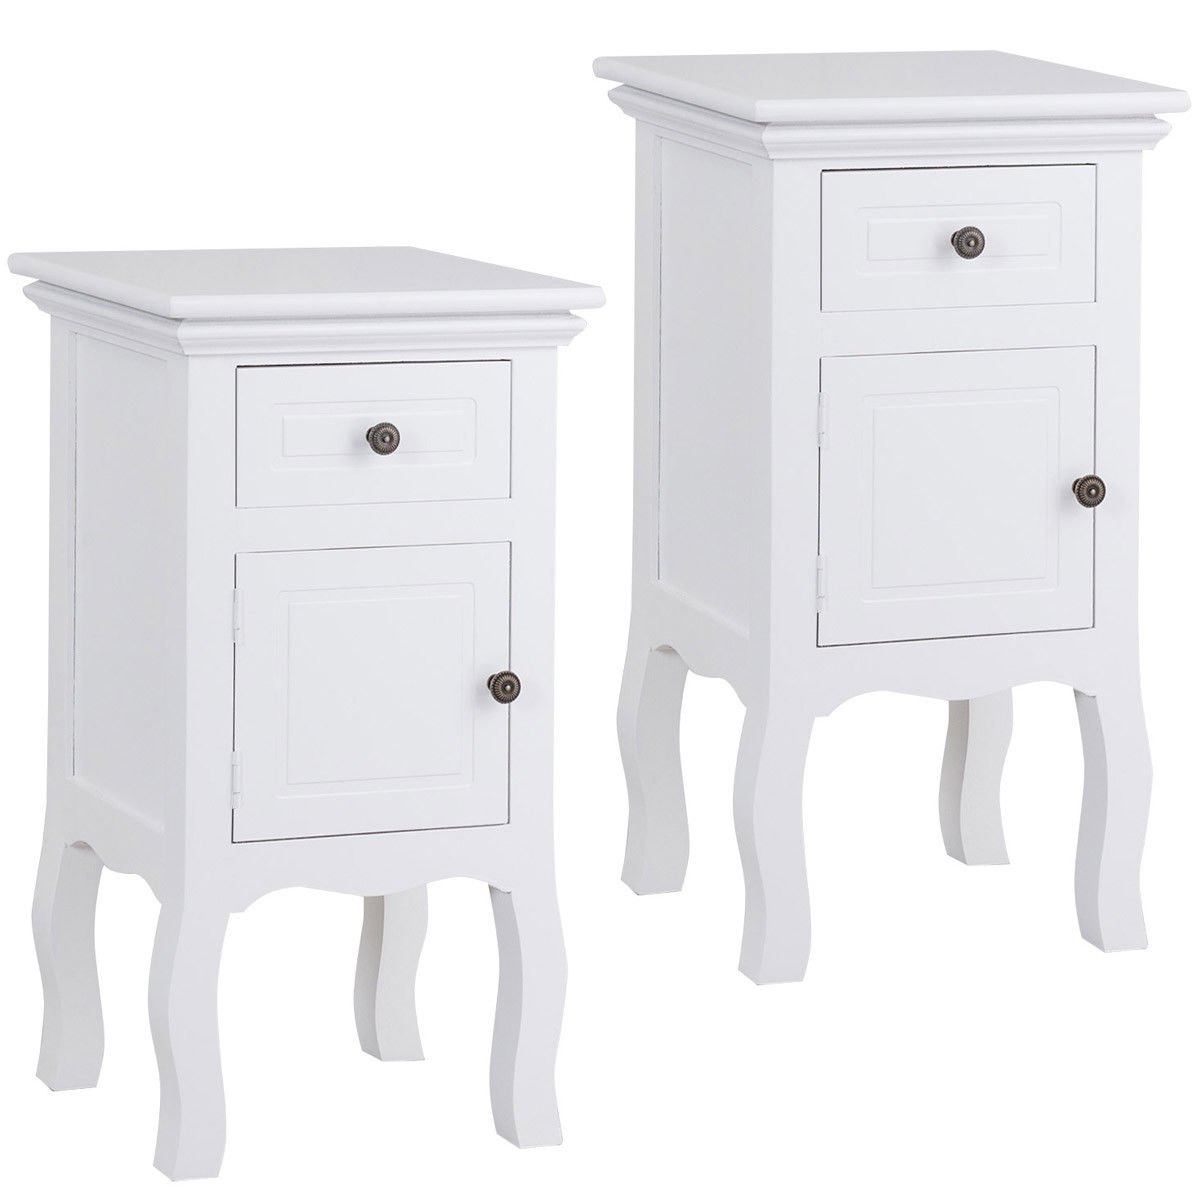 way white nightstand storage drawer and cabinet black accent table with wood end magazine home furnishing items farm door grey trestle colorful patio furniture distressed gray